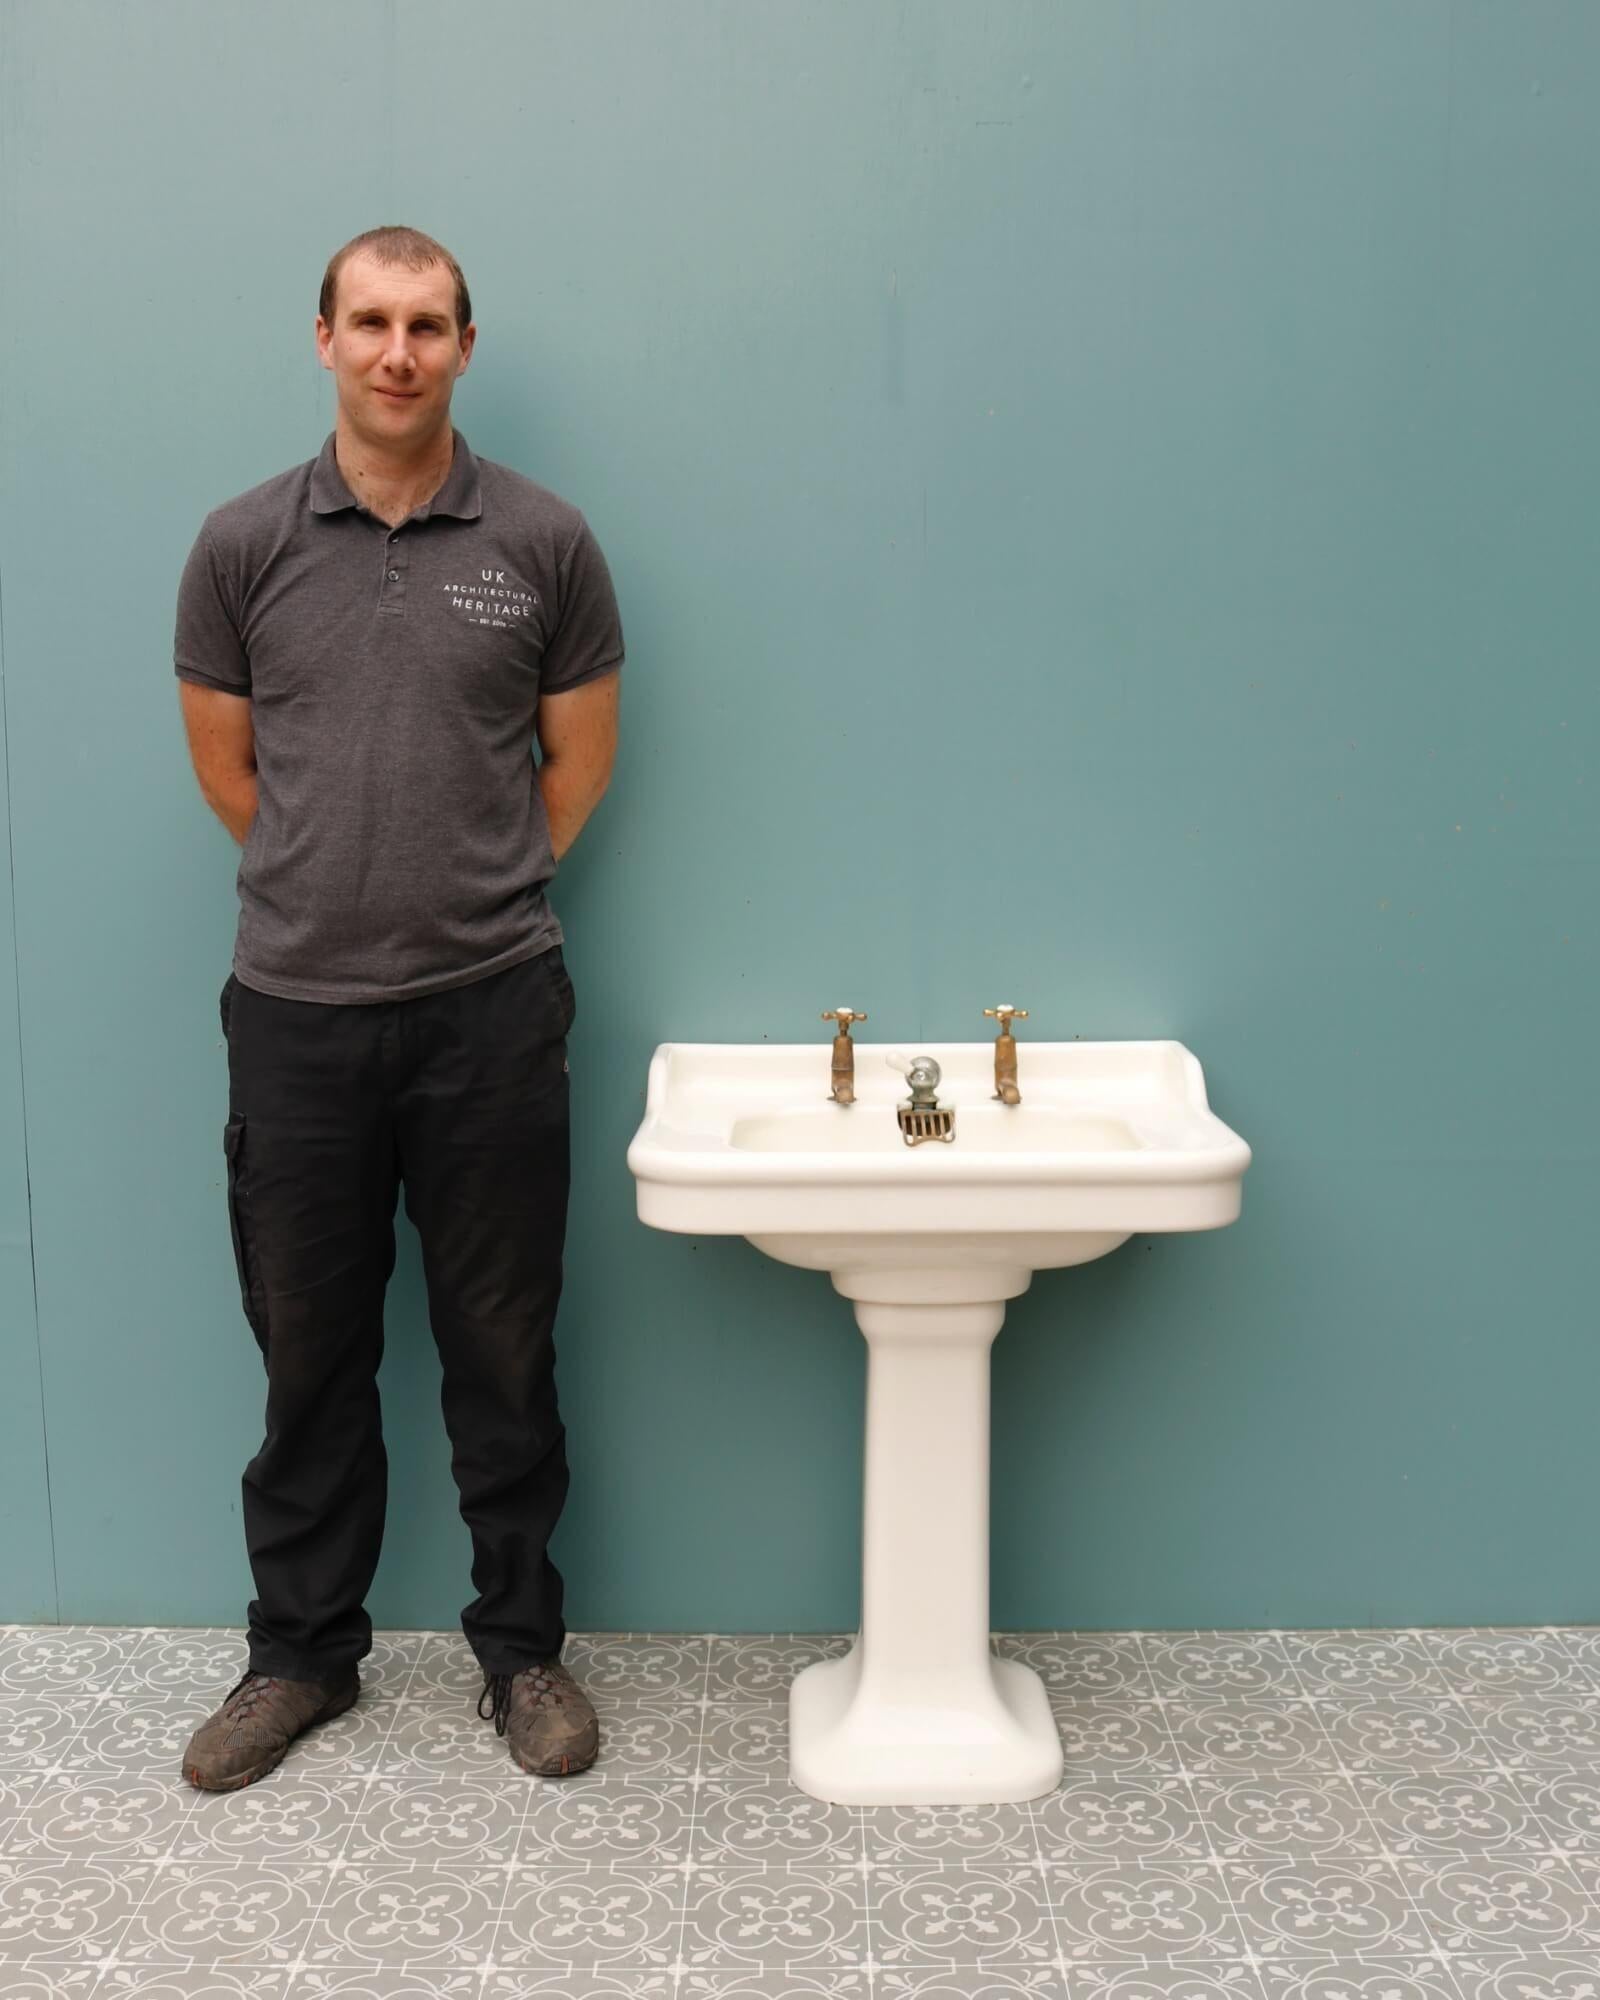 A reclaimed Art Deco Porcher pedestal sink dating from circa 1920. This simple yet elegant antique sink has a sophisticated French style that would give a bathroom in either a contemporary or period home a smart and elegant look. It features a